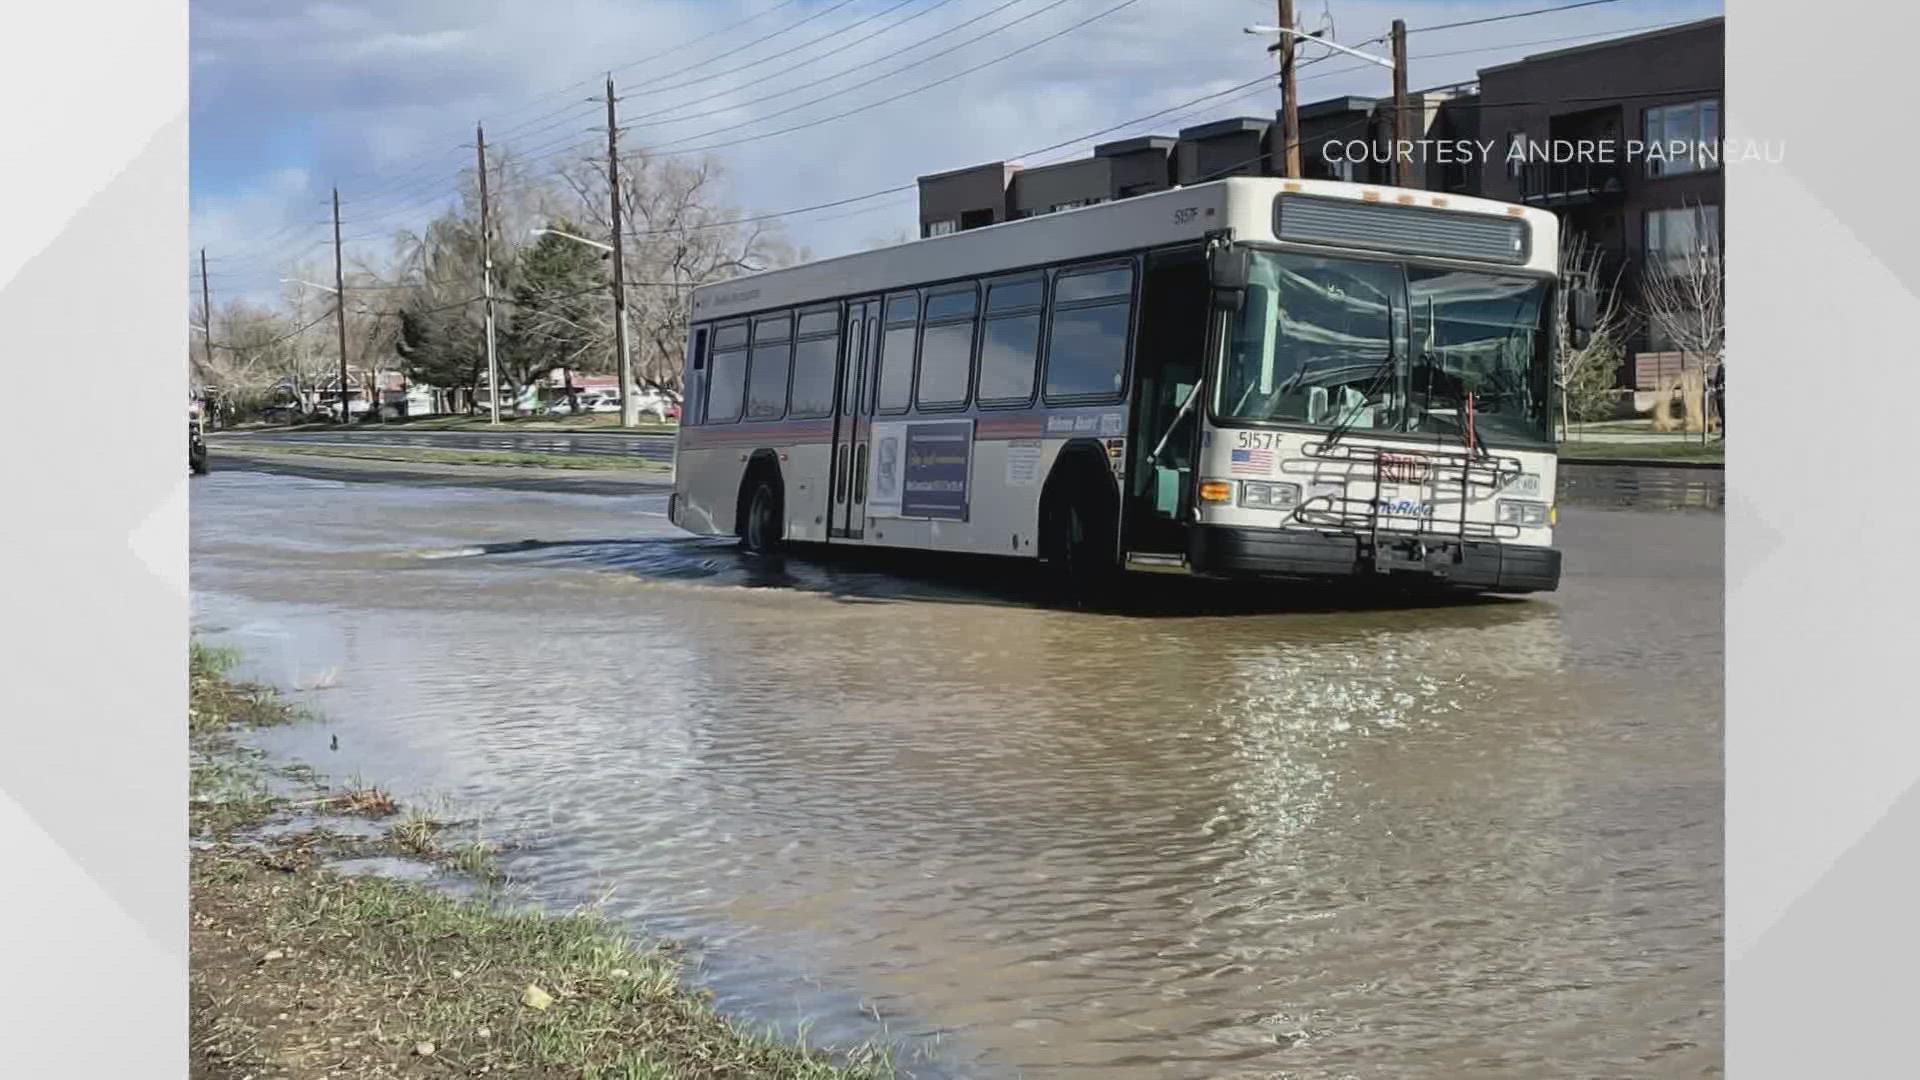 A water main opened up in Boulder and water is rushing down Arapahoe near 55th. The bus has a couple of tires sinking into that hole.